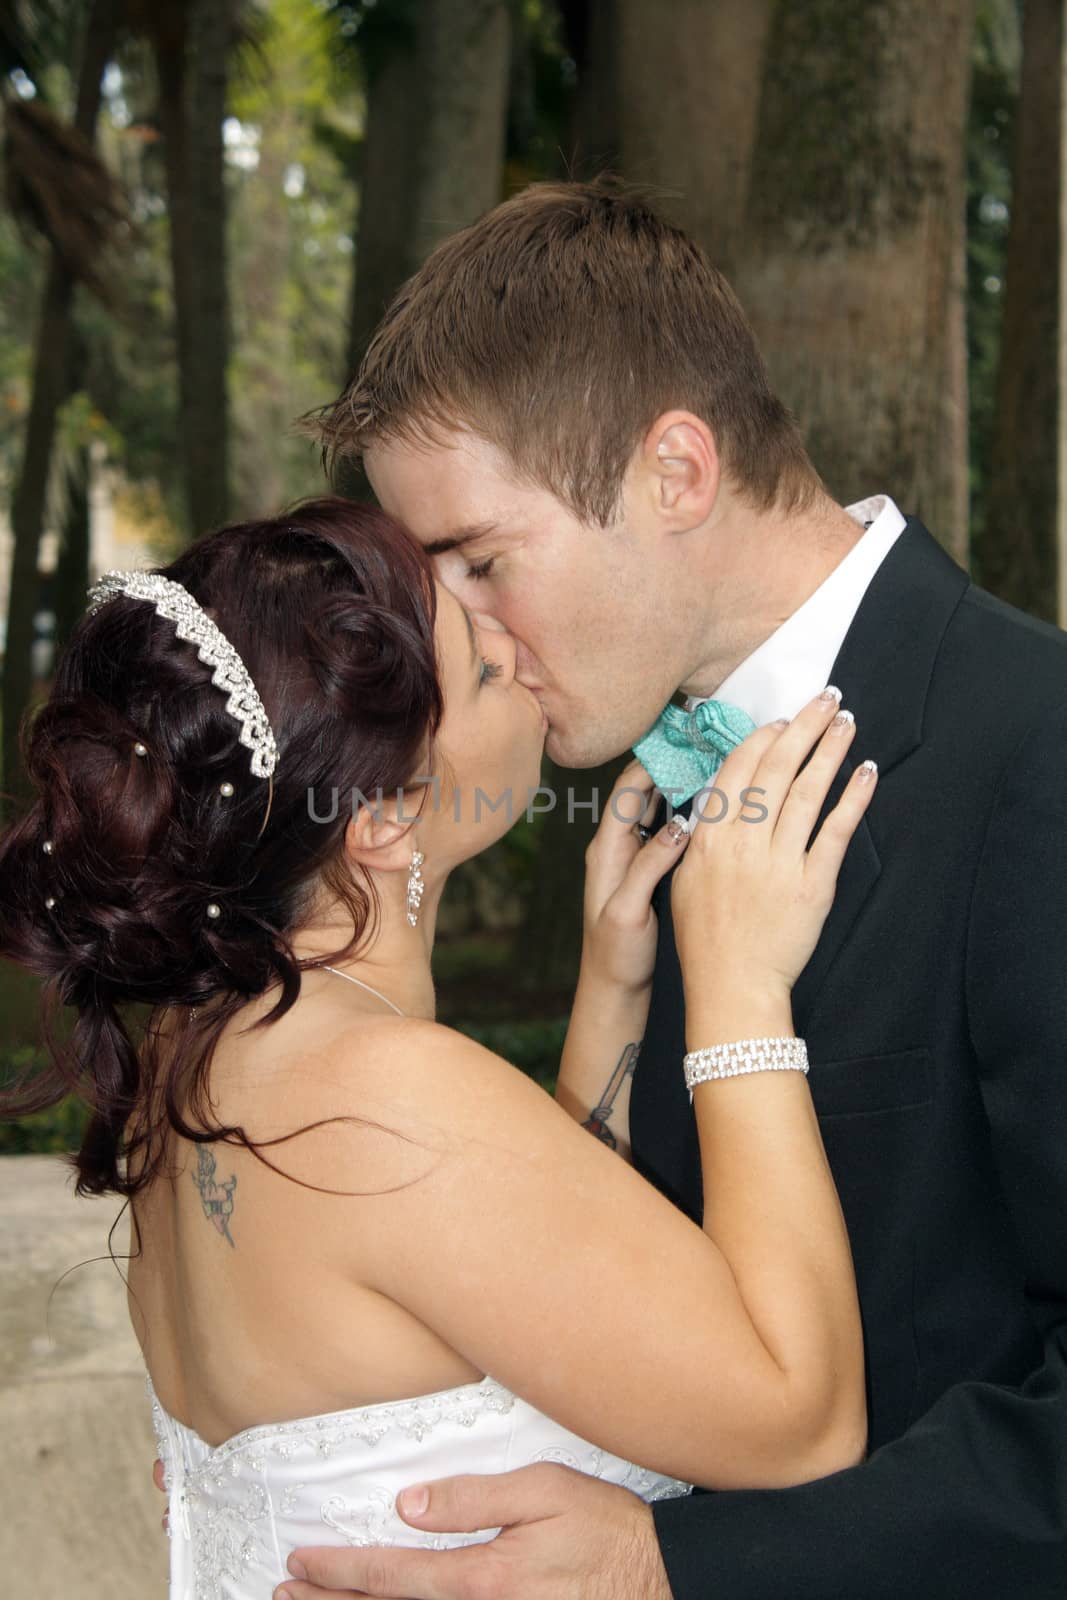 A handsome groom kisses his beautiful bride outdoors.